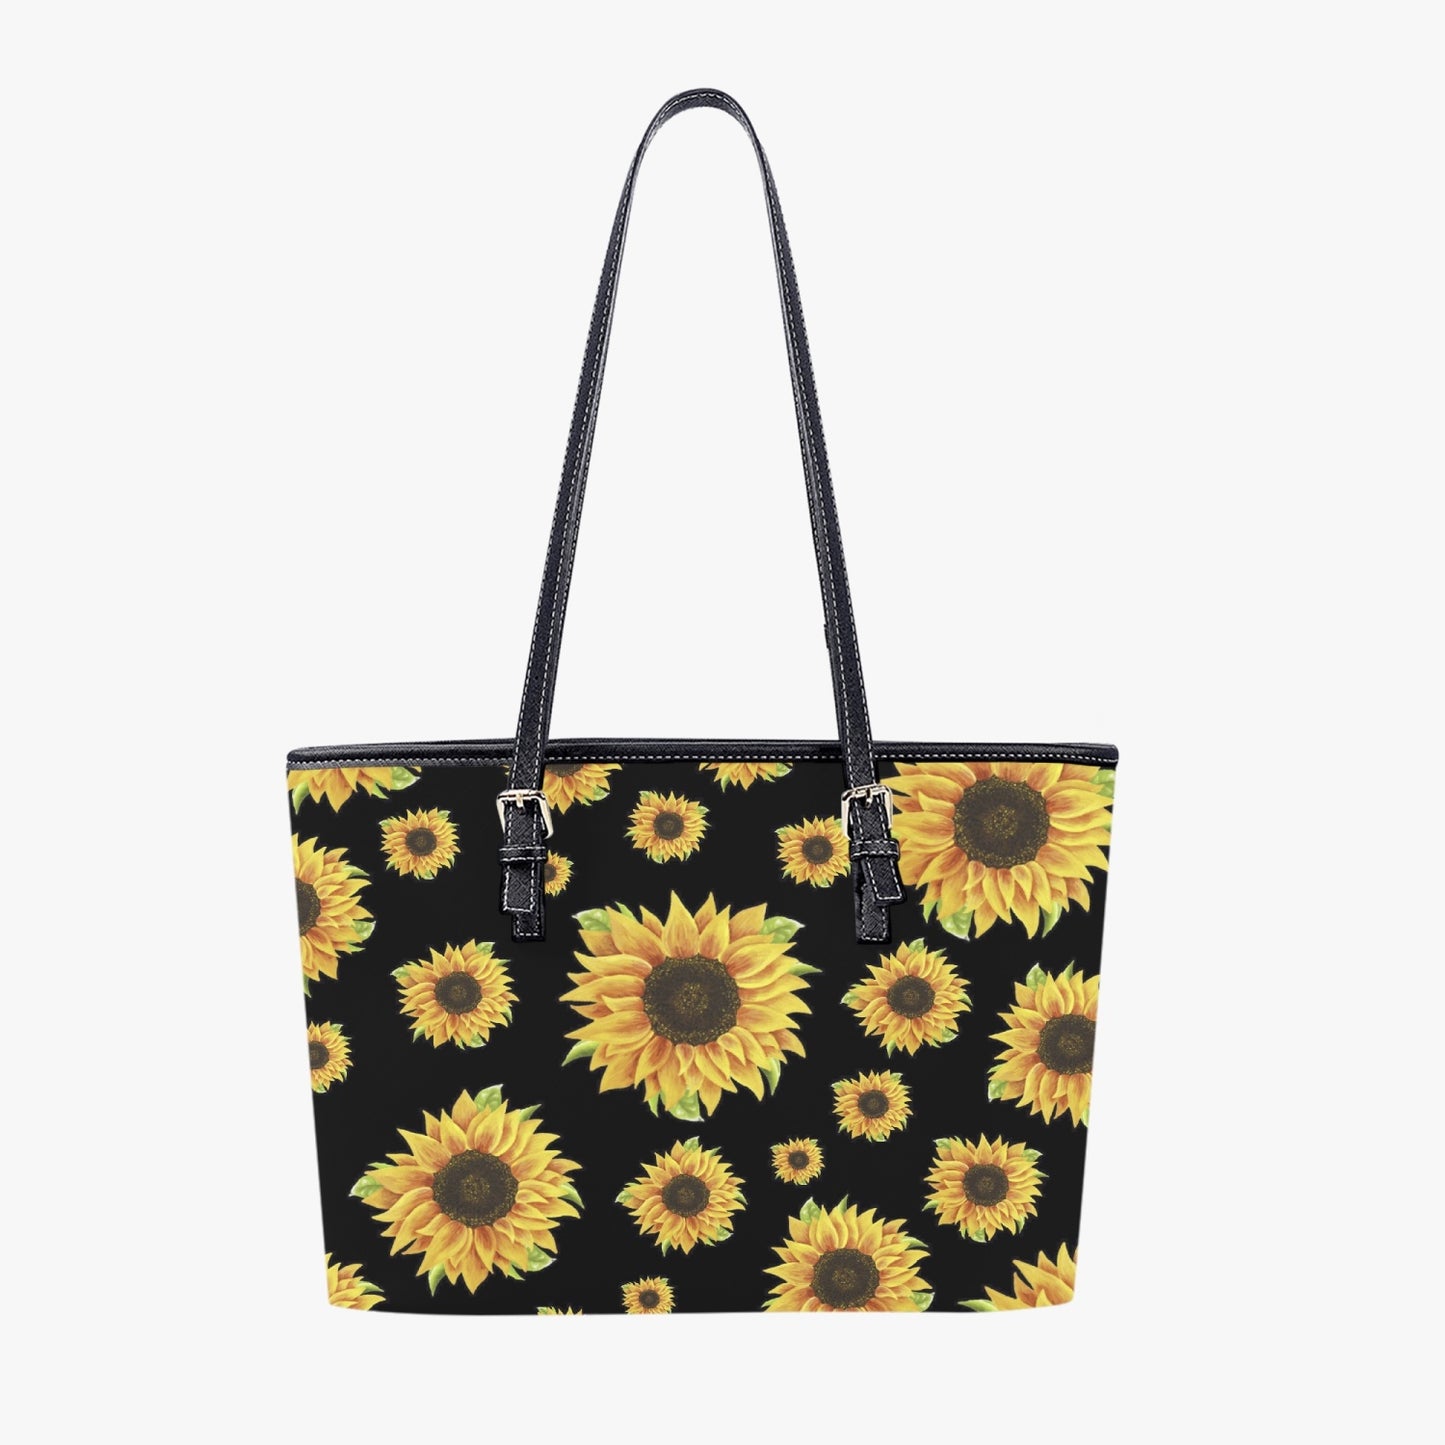 Sunflower Large Leather Tote Bag for Women